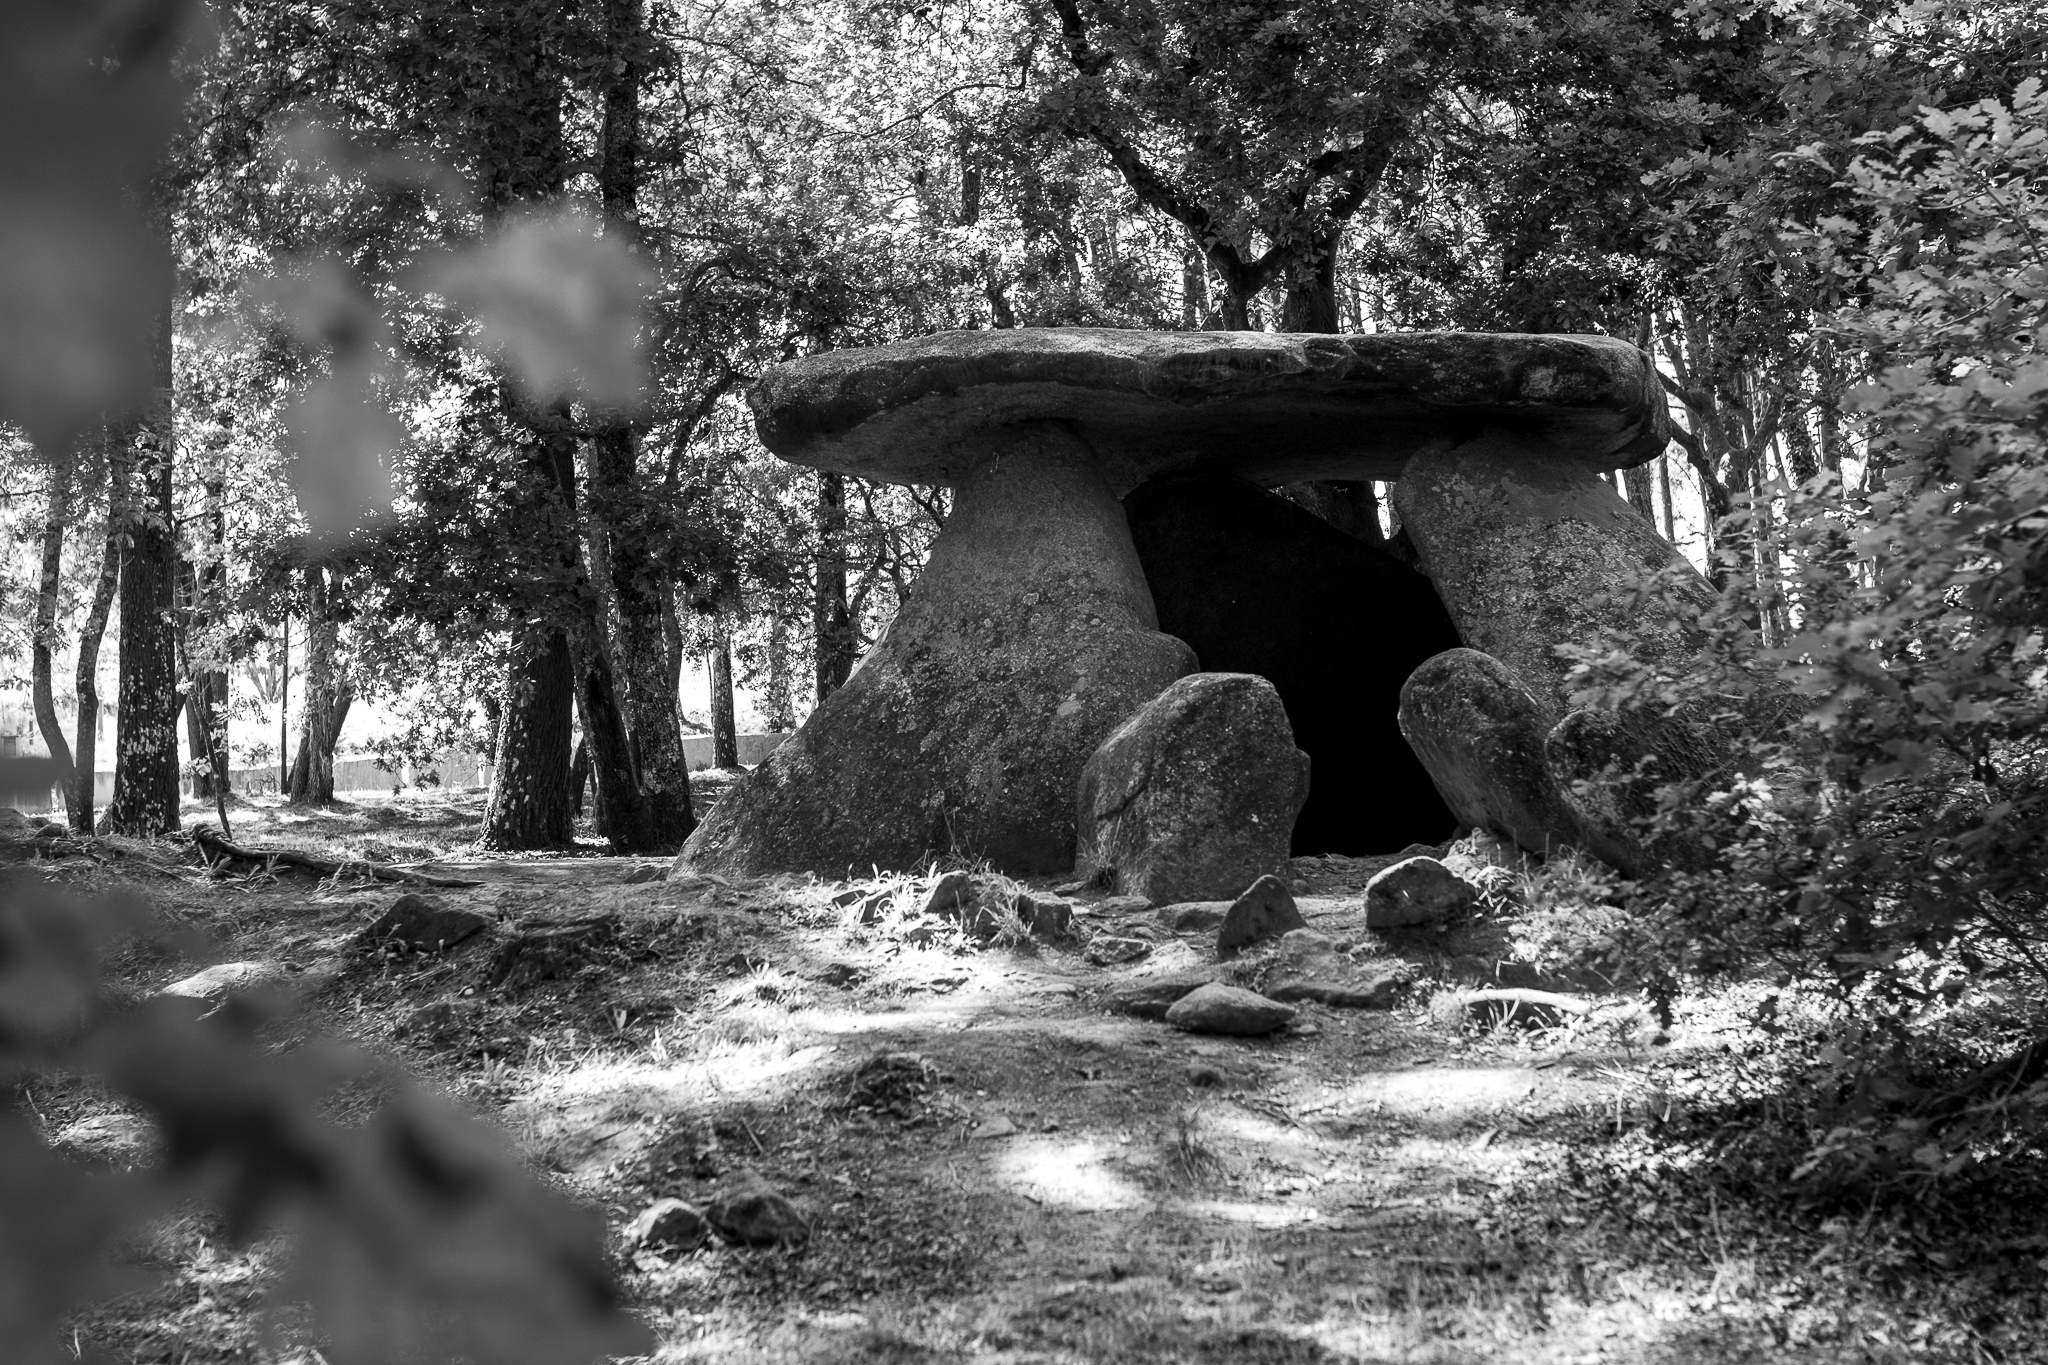  The dolmen of Axeitos or Pedra do Mouro dates back to between 4000 and 3600 B.C. Located in Oleiros, the dolmen is considered the "Galician megalithic parthenon". This, through a small corridor, allowed access to a burial chamber.